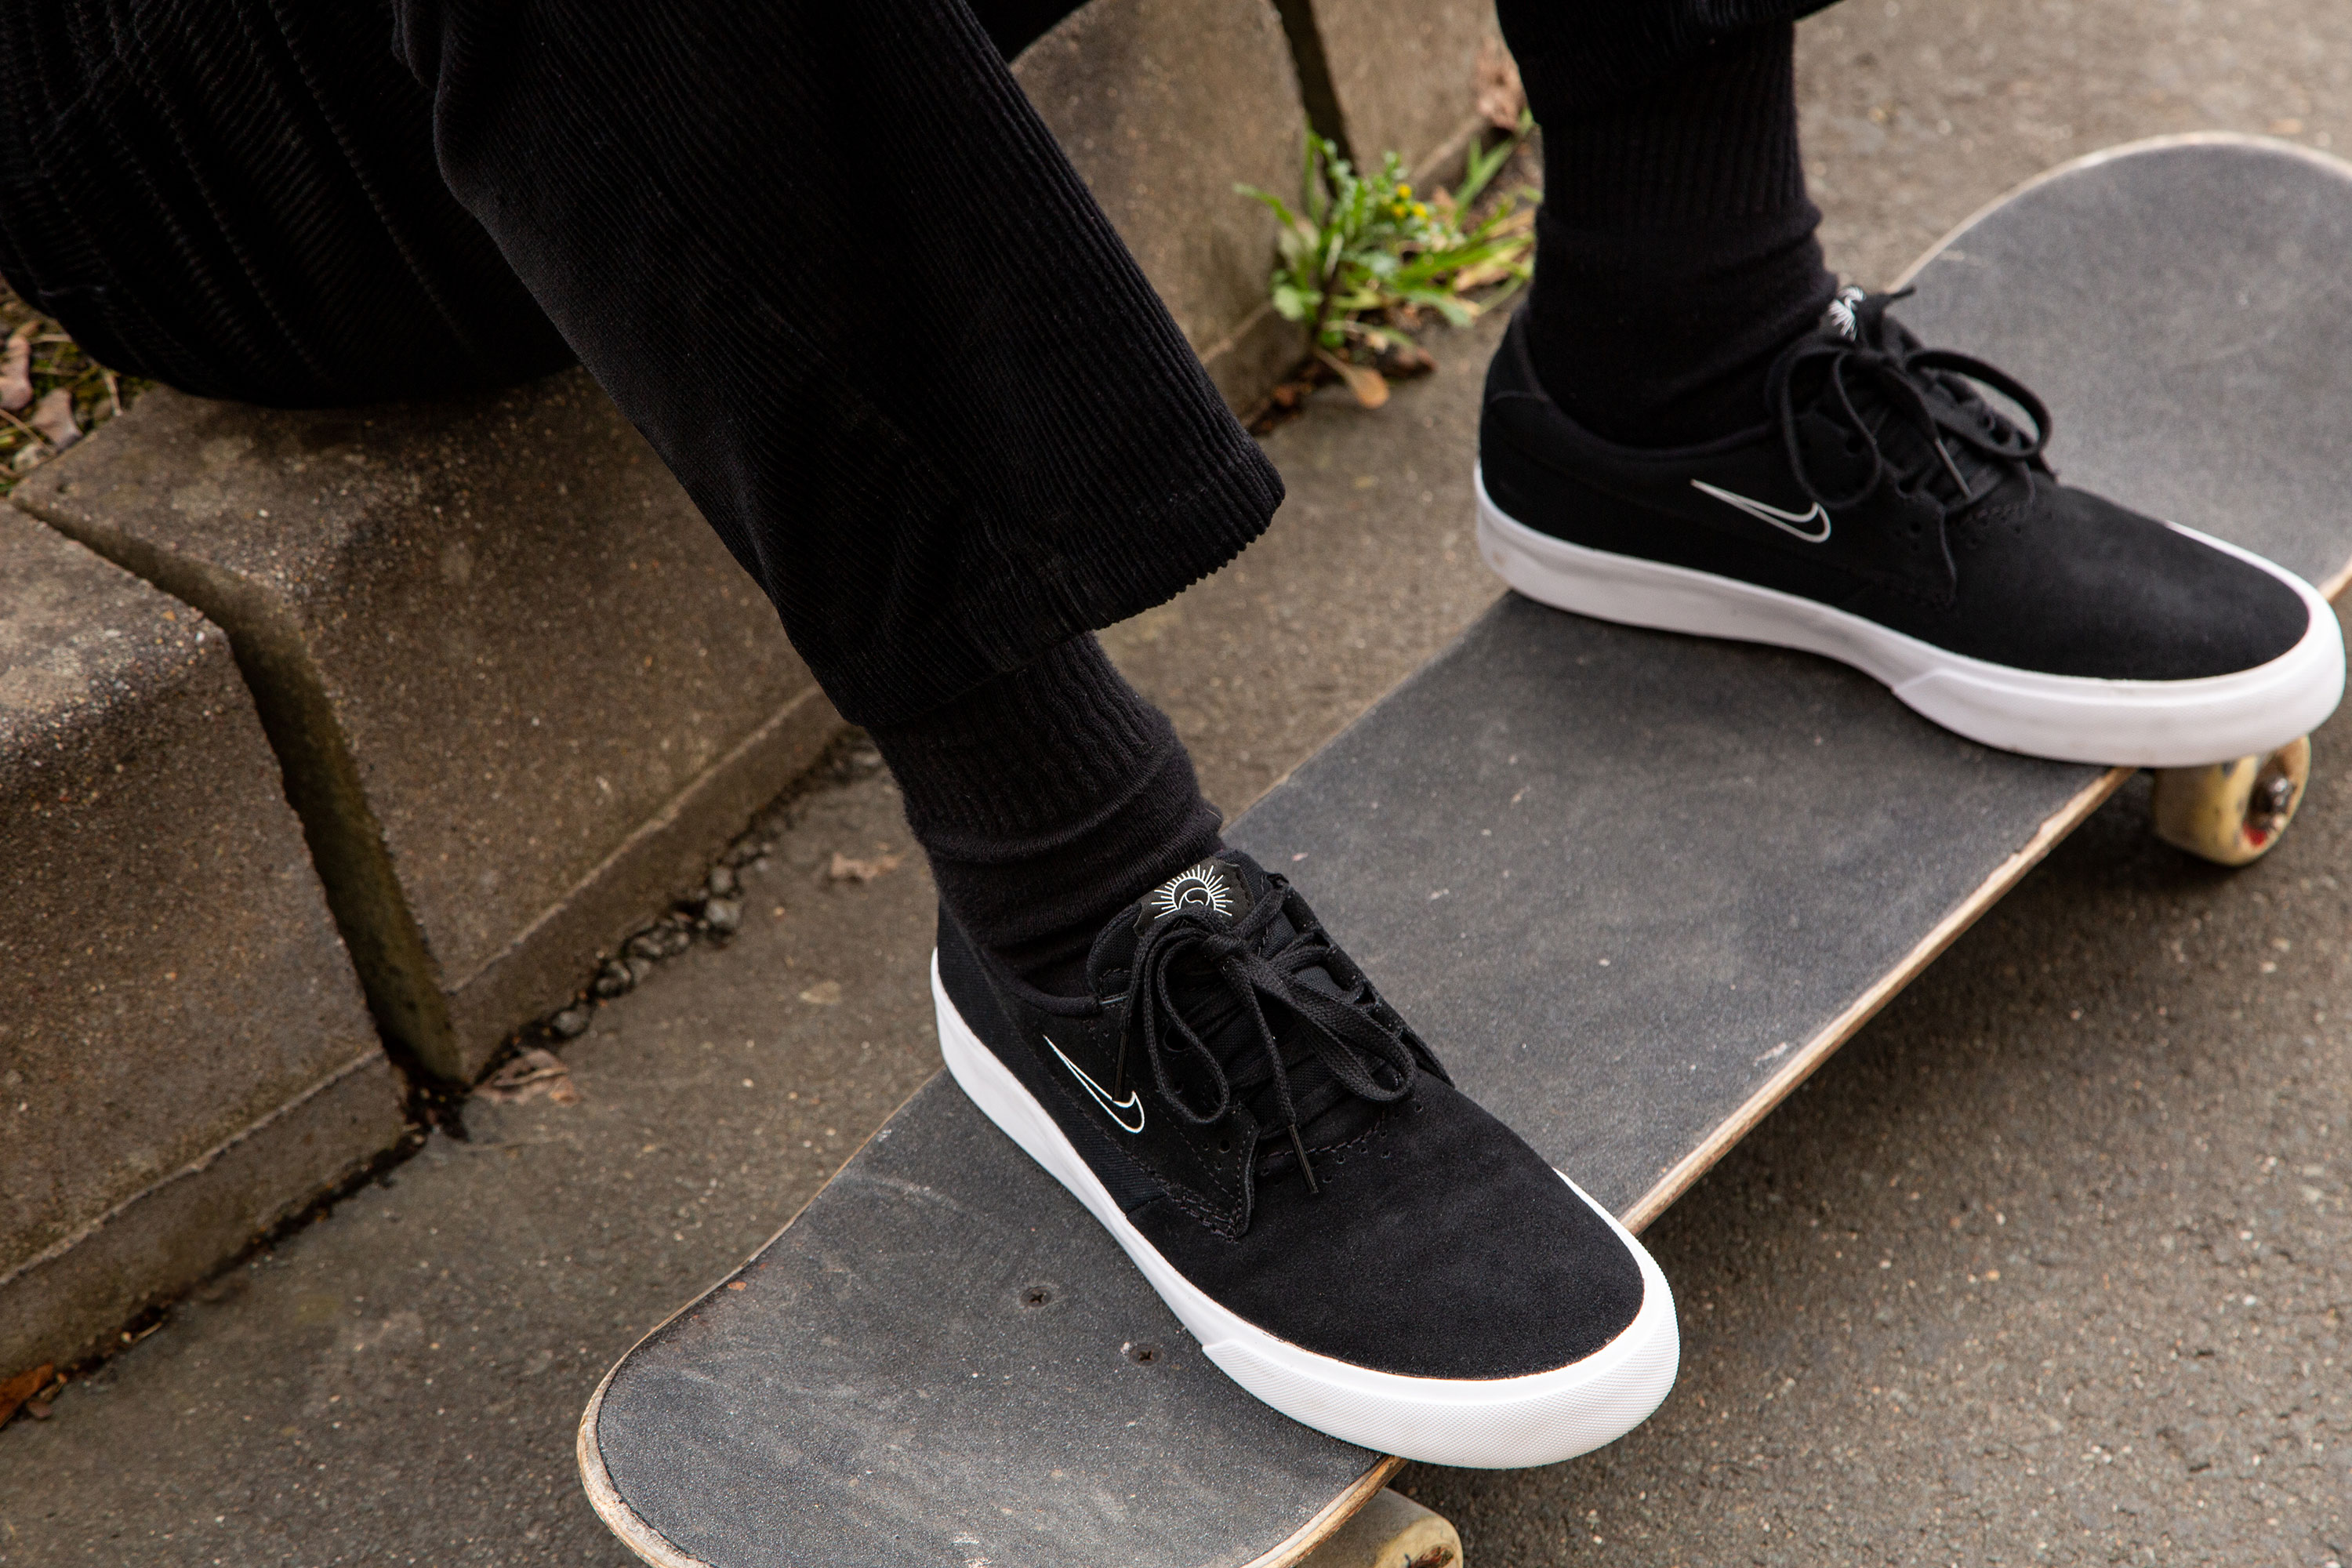 skate shoes with ollie pad